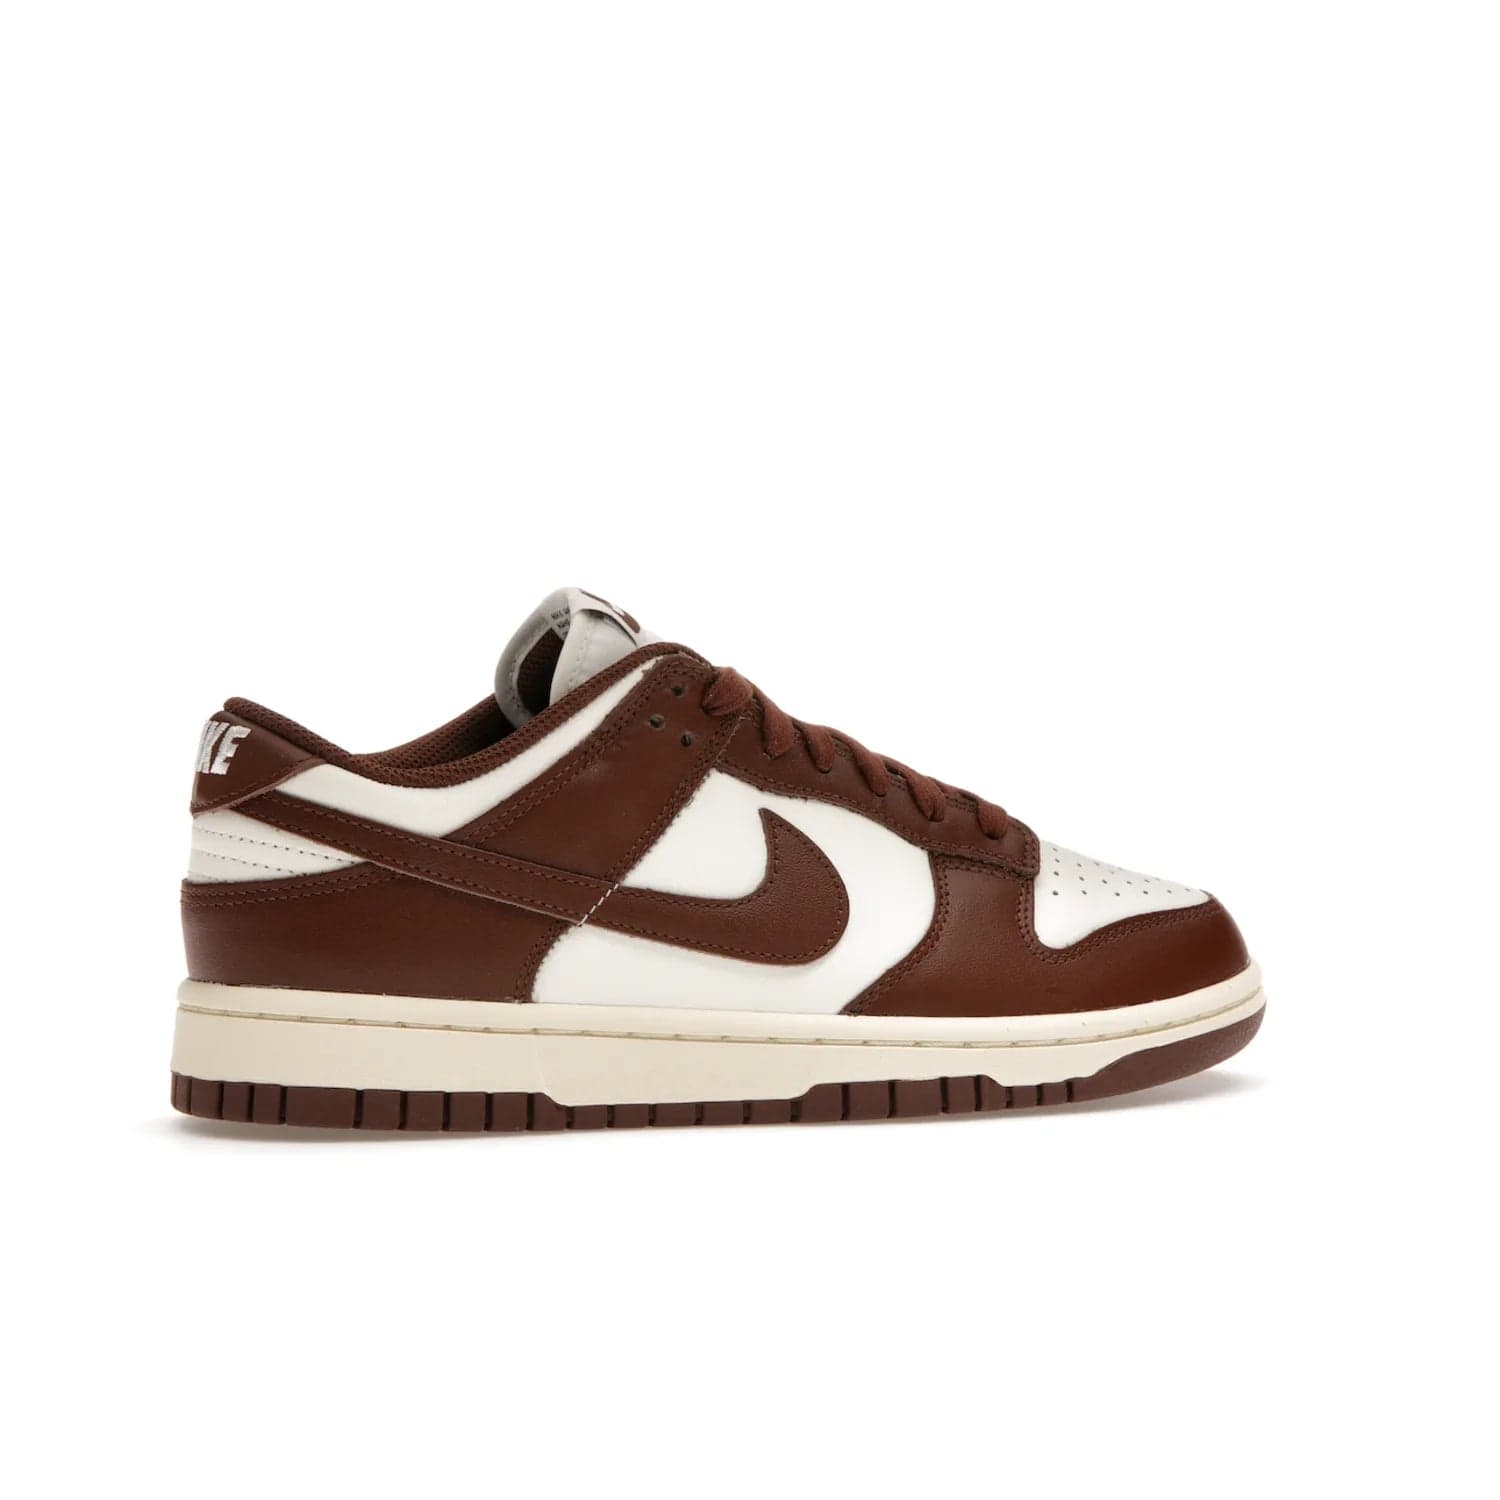 Nike Dunk Low Cacao Wow (Women's) - Image 35 - Only at www.BallersClubKickz.com - Revised
Get the Nike Dunk Low Cacao Wow and make a statement! Plush leather and a cool Cacao Wow finish bring together a unique mix of comfort and fashion that will turn heads. Boosted with a Coconut Milk hue. Shop today.